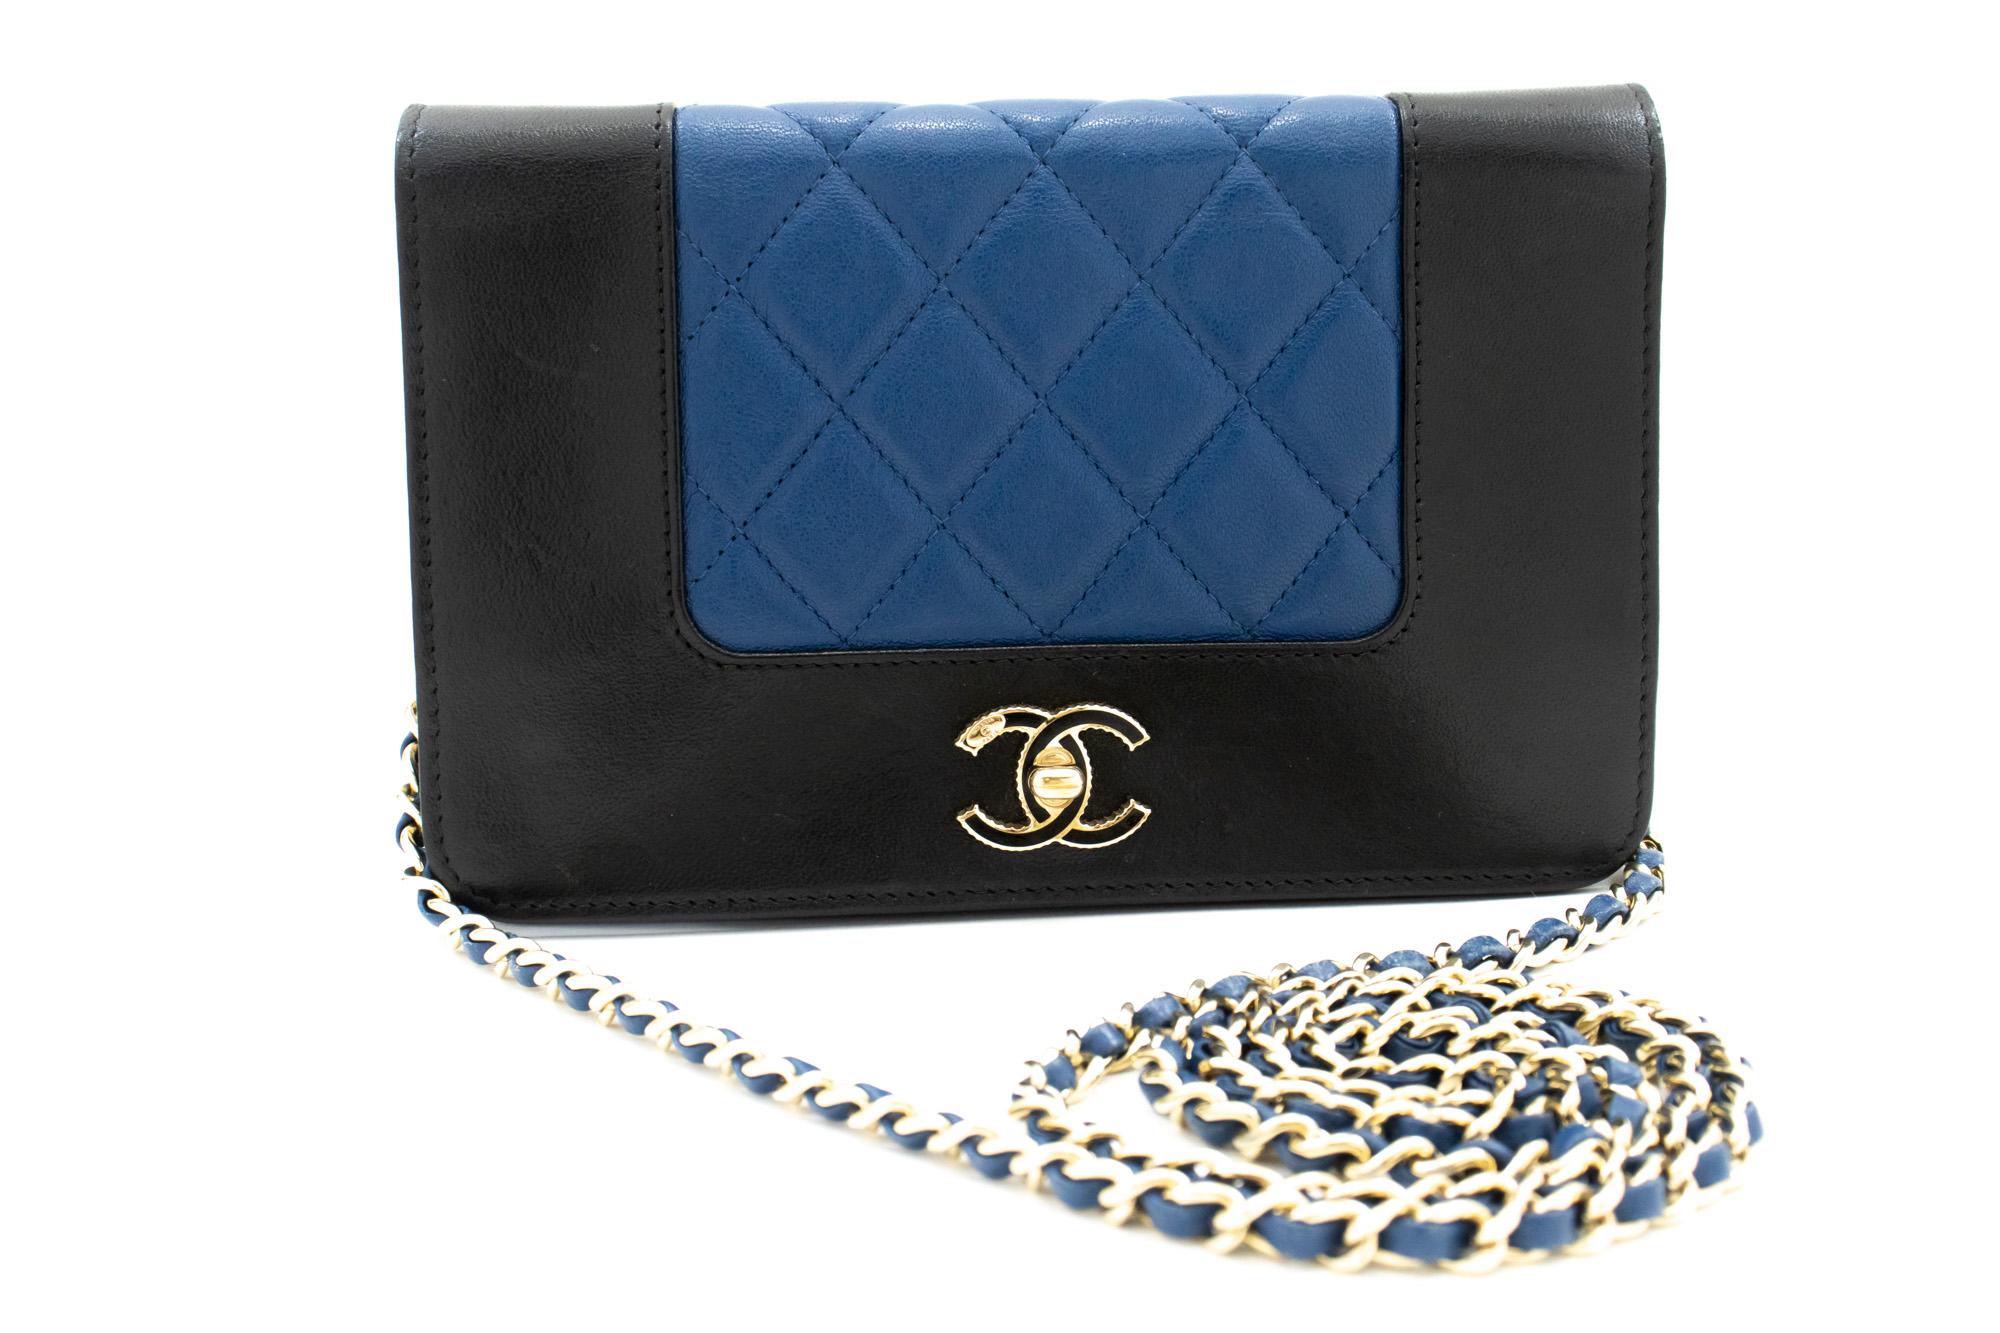 An authentic CHANEL Black Blue Wallet On Chain WOC Shoulder Bag Crossbody Gold. The color is Black. The outside material is Leather. The pattern is Solid. This item is Contemporary. The year of manufacture would be 2016.
Conditions & Ratings
Outside